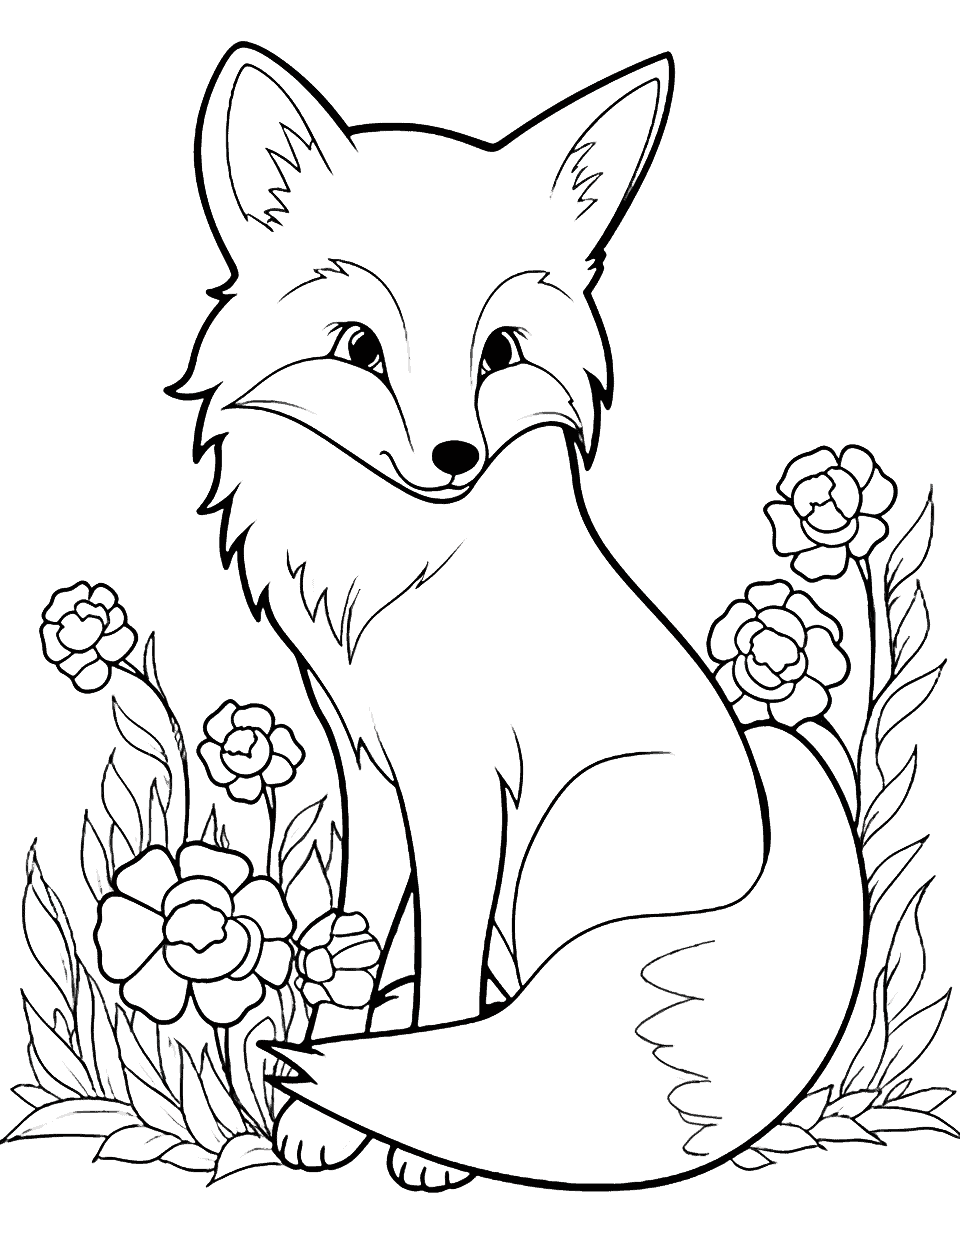 Fox in a Meadow Cute Coloring Page - A cute fox sitting in a meadow filled with colorful flowers.